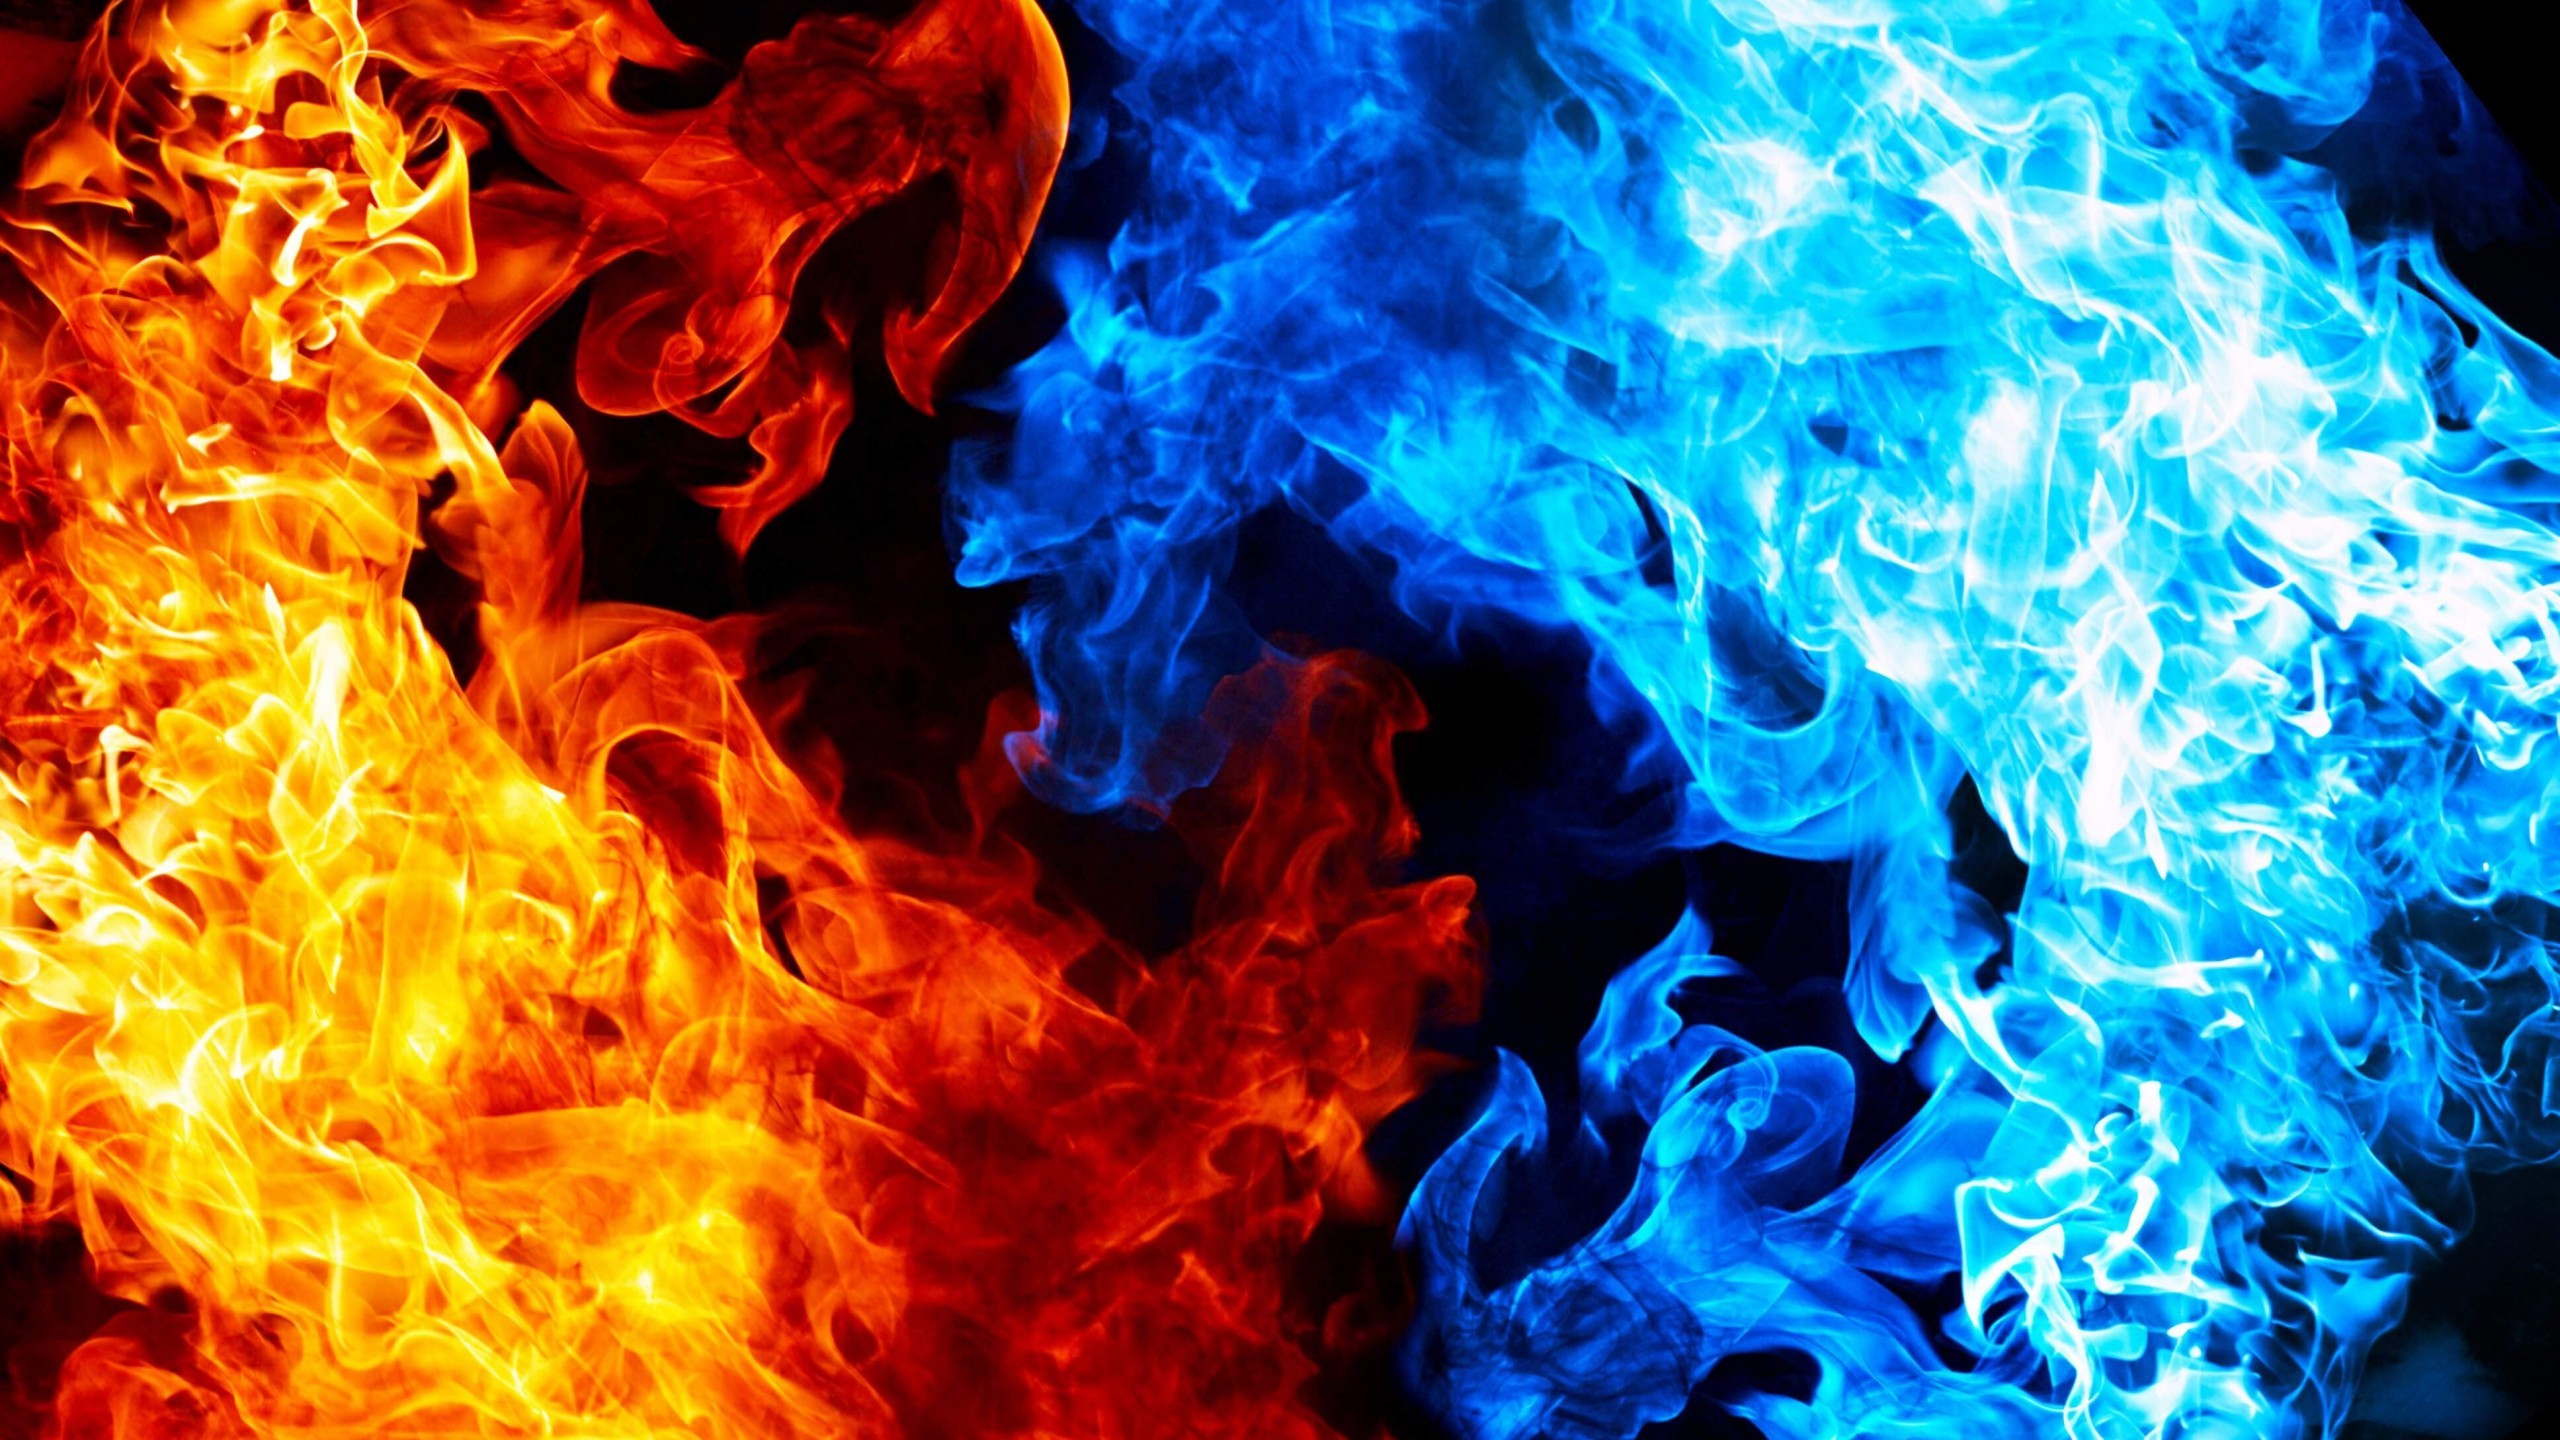 2560x1440 Blue And Red Fire Wallpaper for Desktop 2560 x 1440